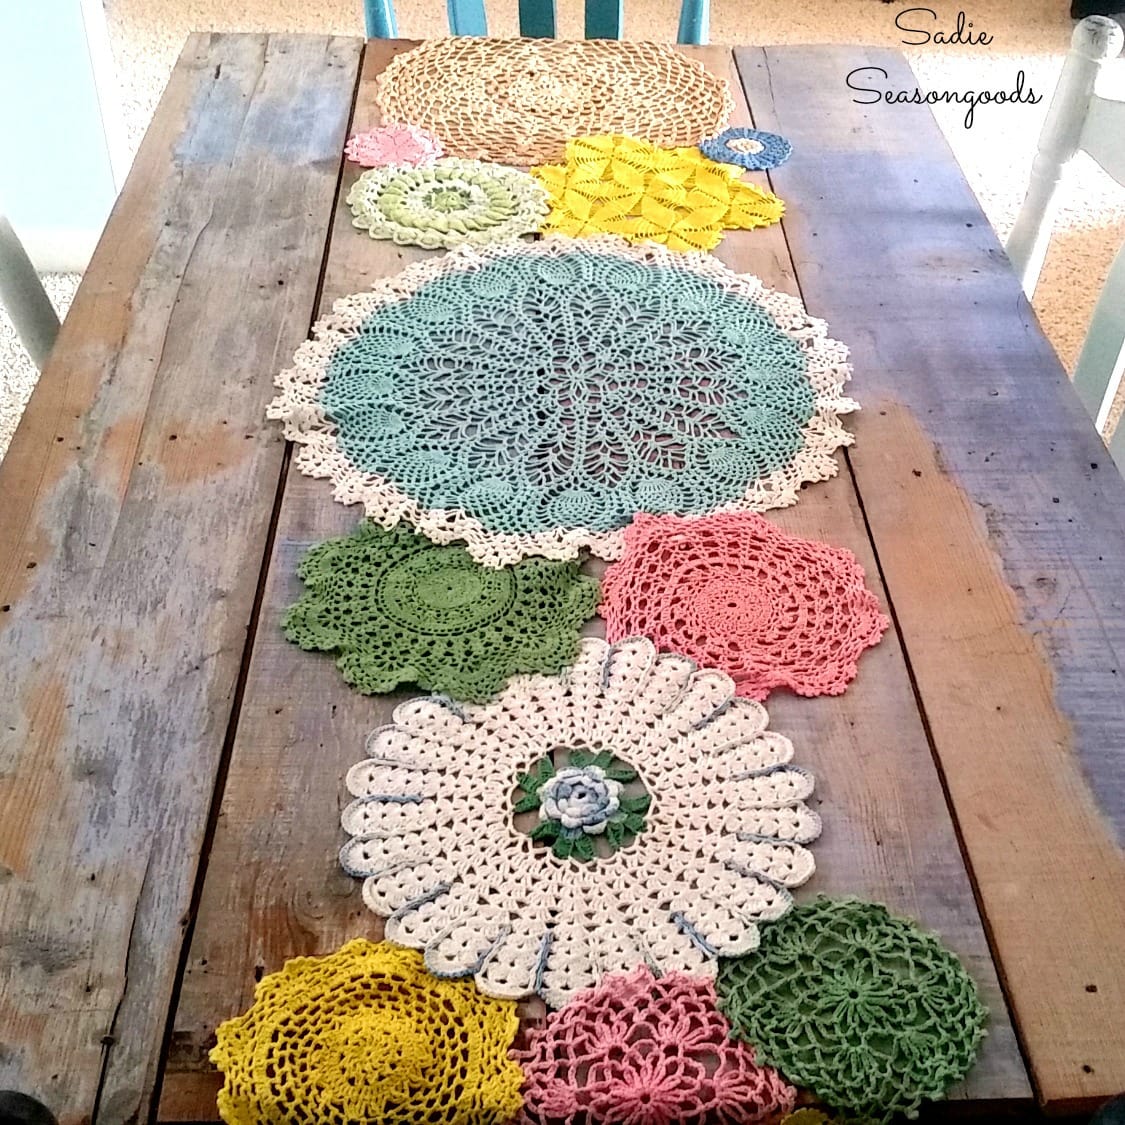 6 Primitive decor or country cottage decor with lace doilies or vintage doilies upcycled into Spring table runner by Sadie Seasongoods